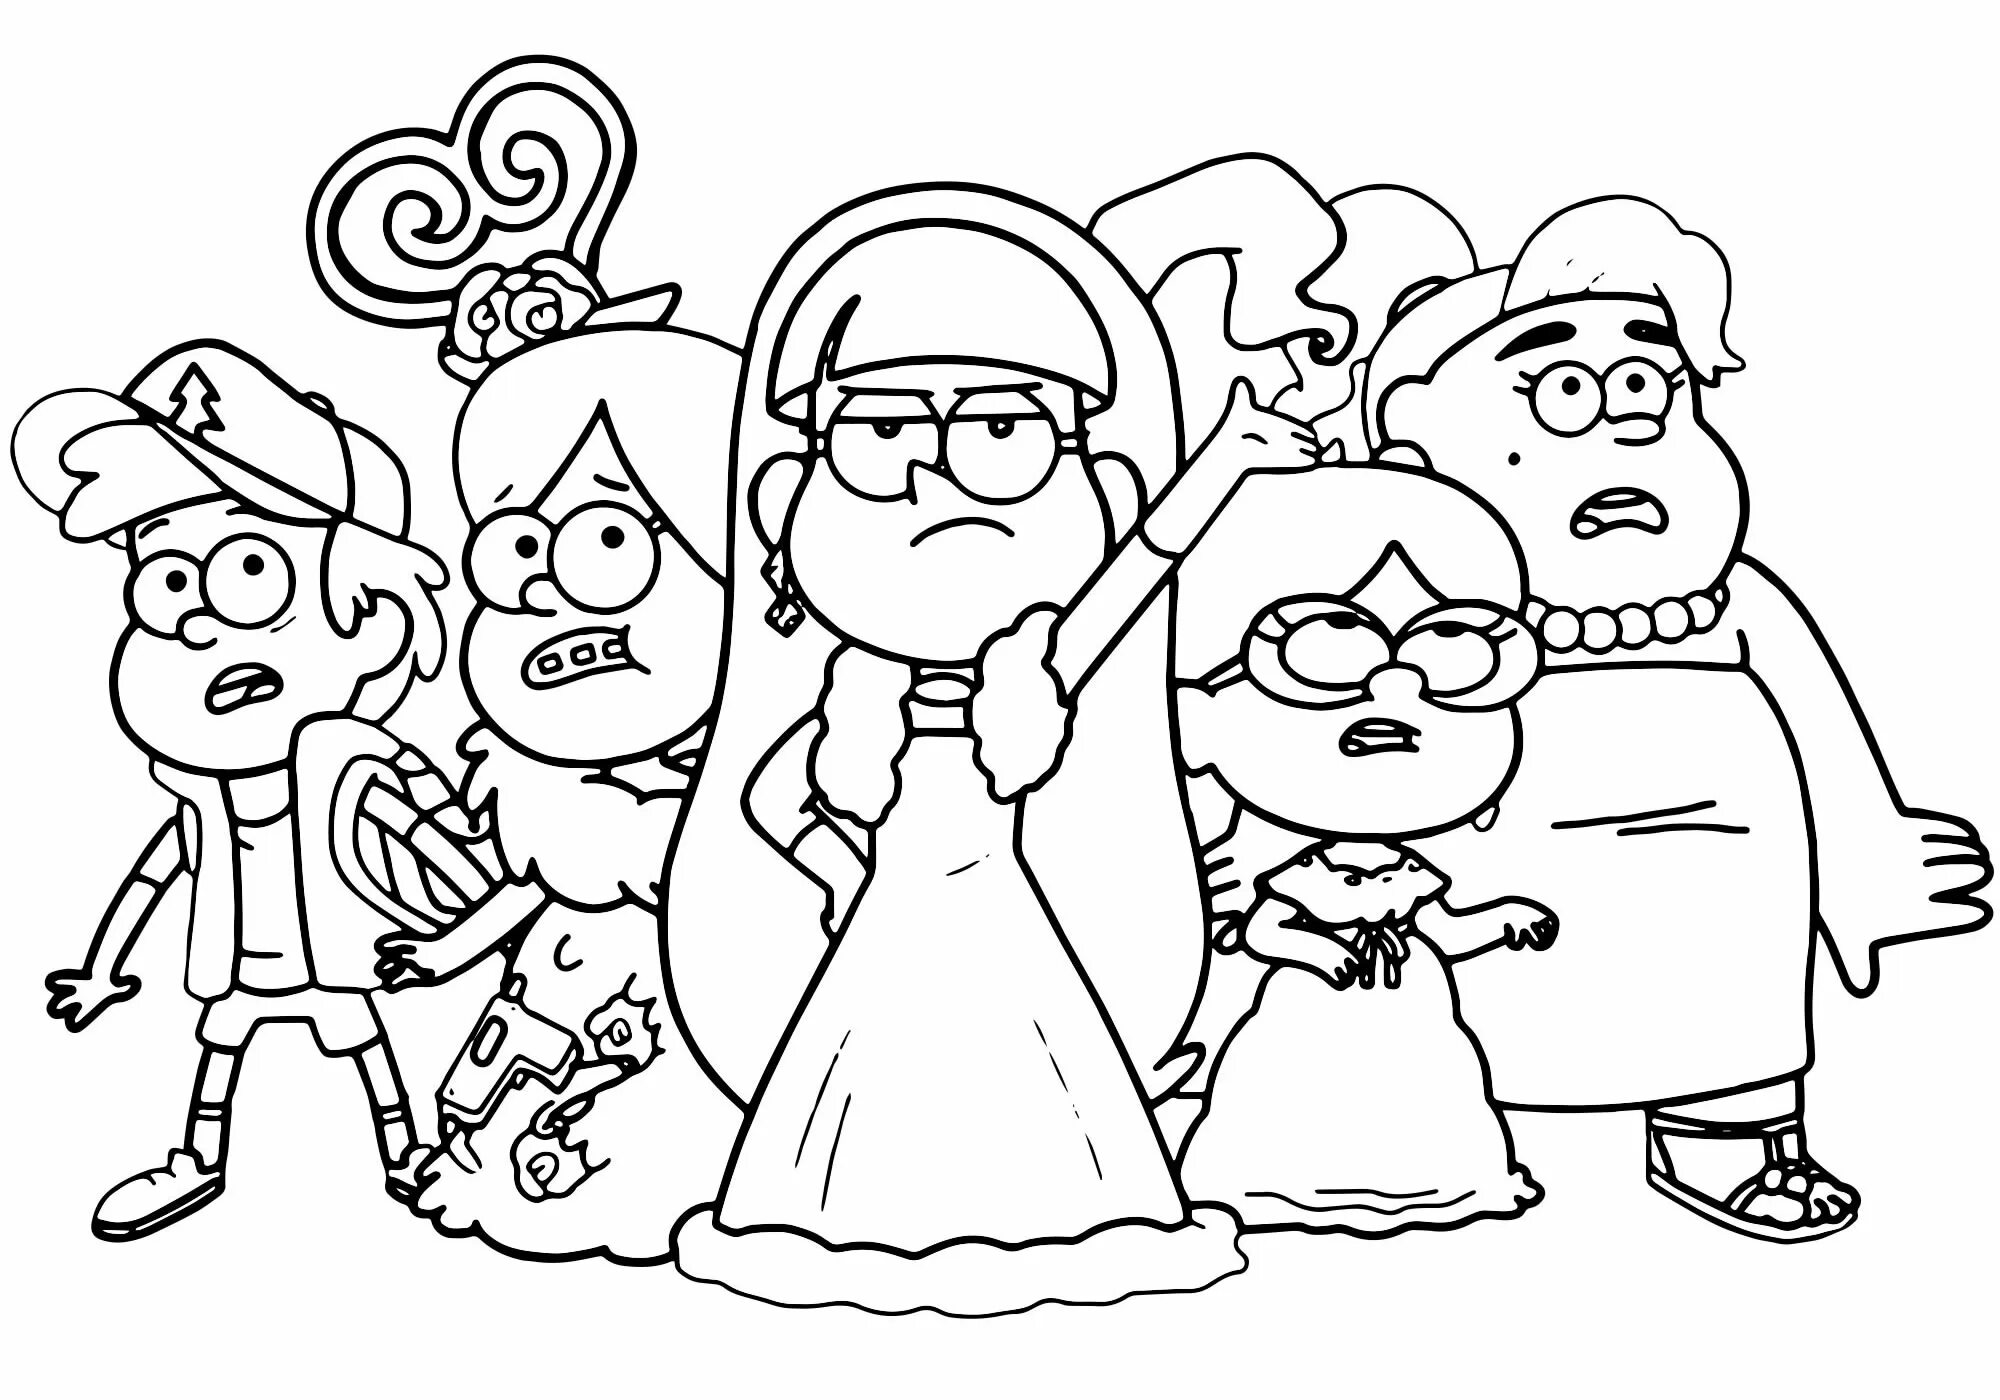 Mega gravity falls coloring book filled with color